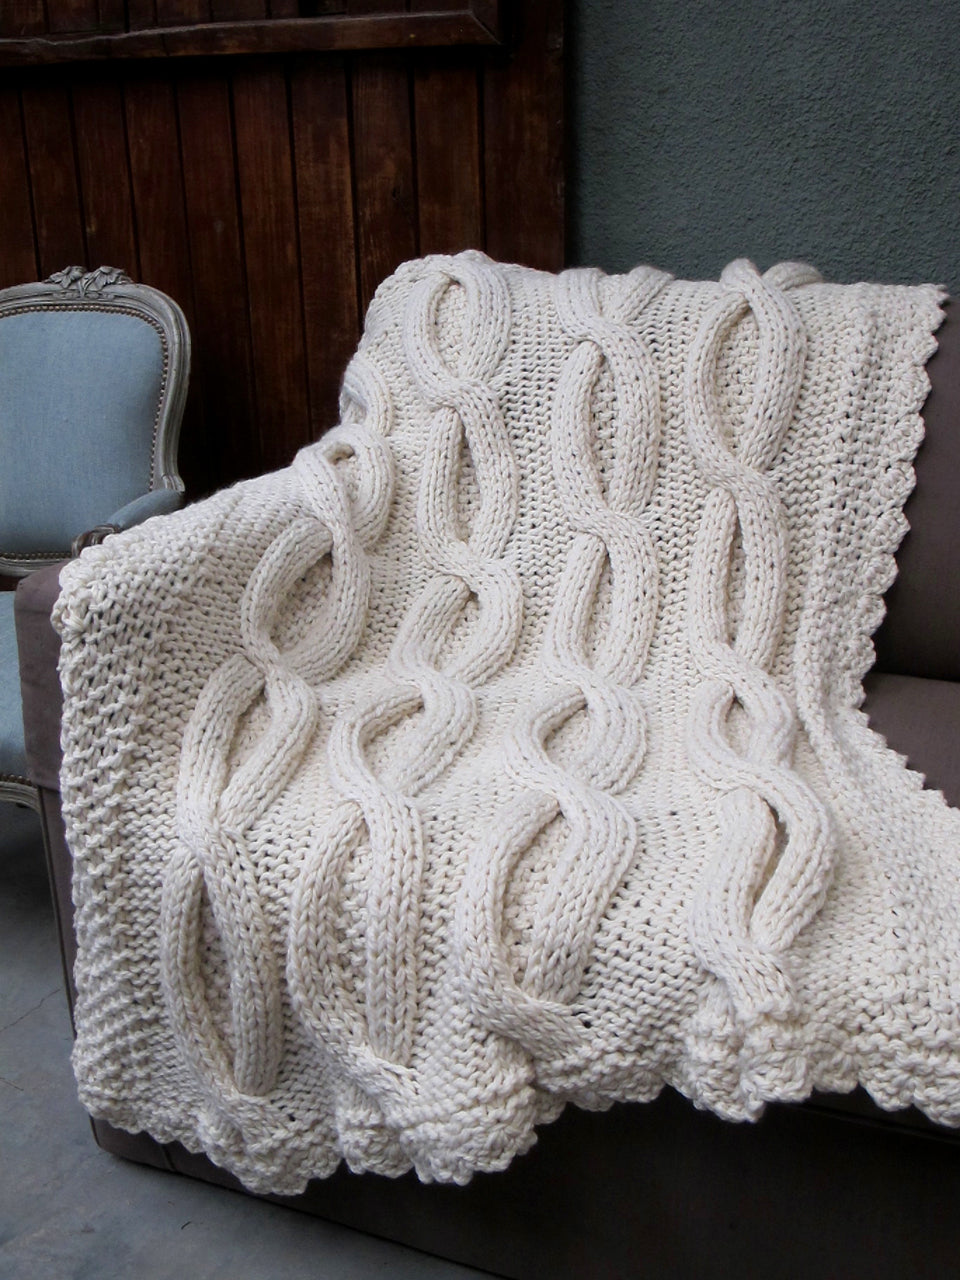 Shabby Chic Throw - Cable Knit Throw